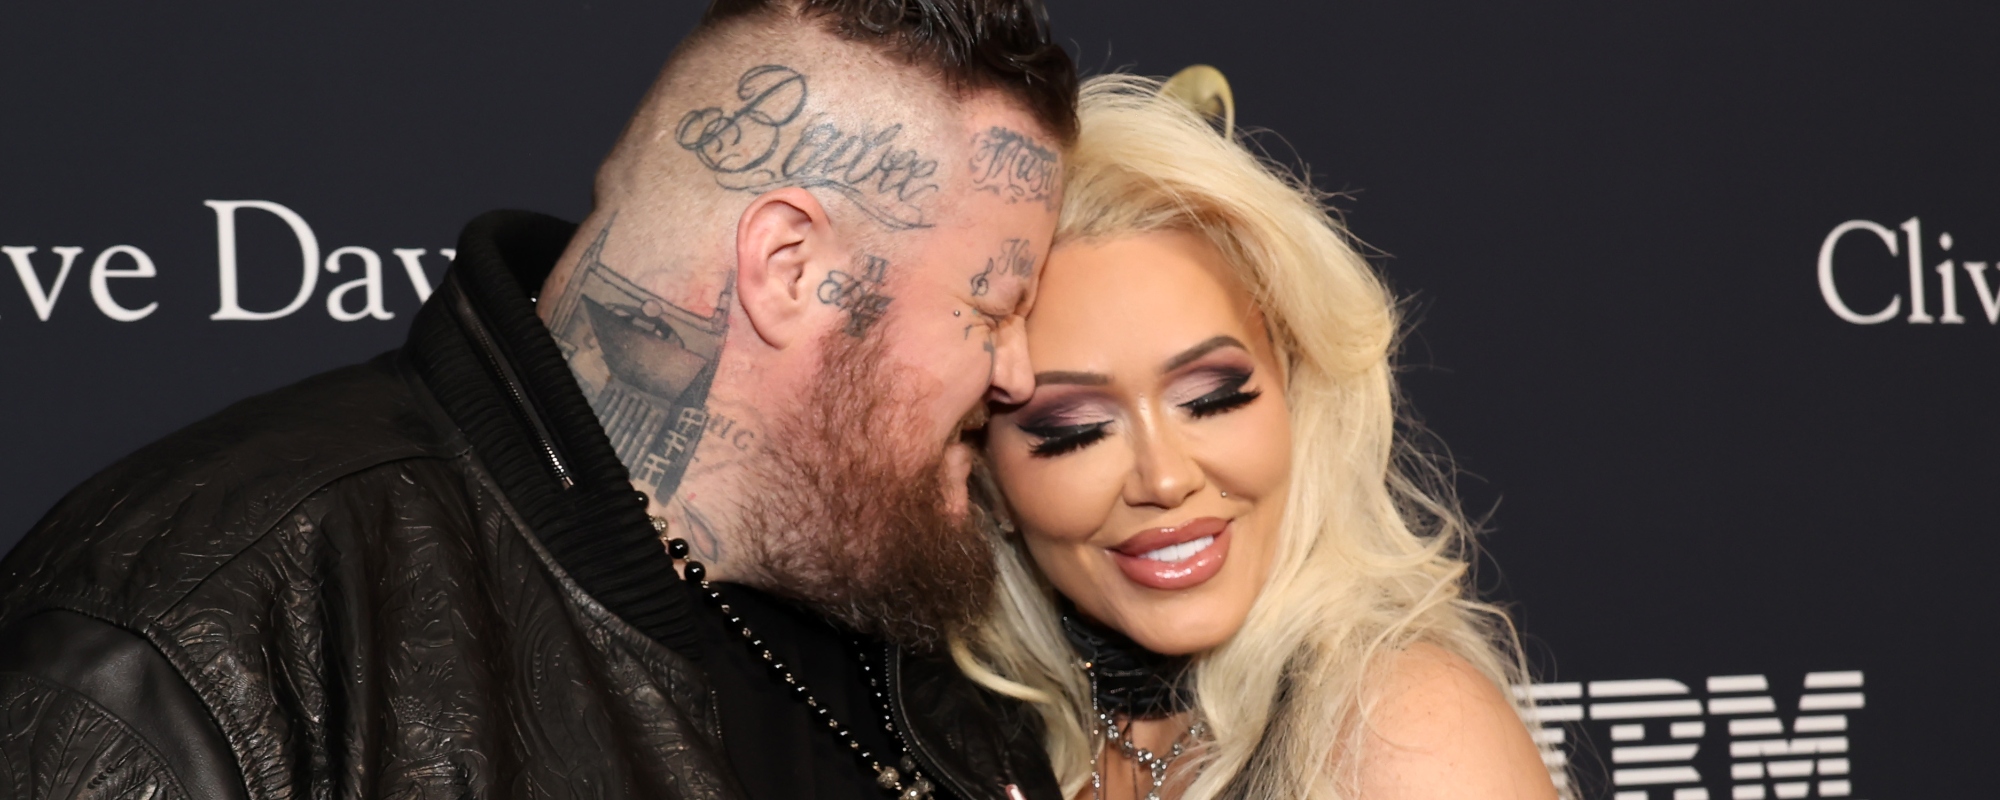 Bunnie Xo Shares Video of a Loopy Jelly Roll Undergoing Dental Procedure: “I Want a Pretty Smile”